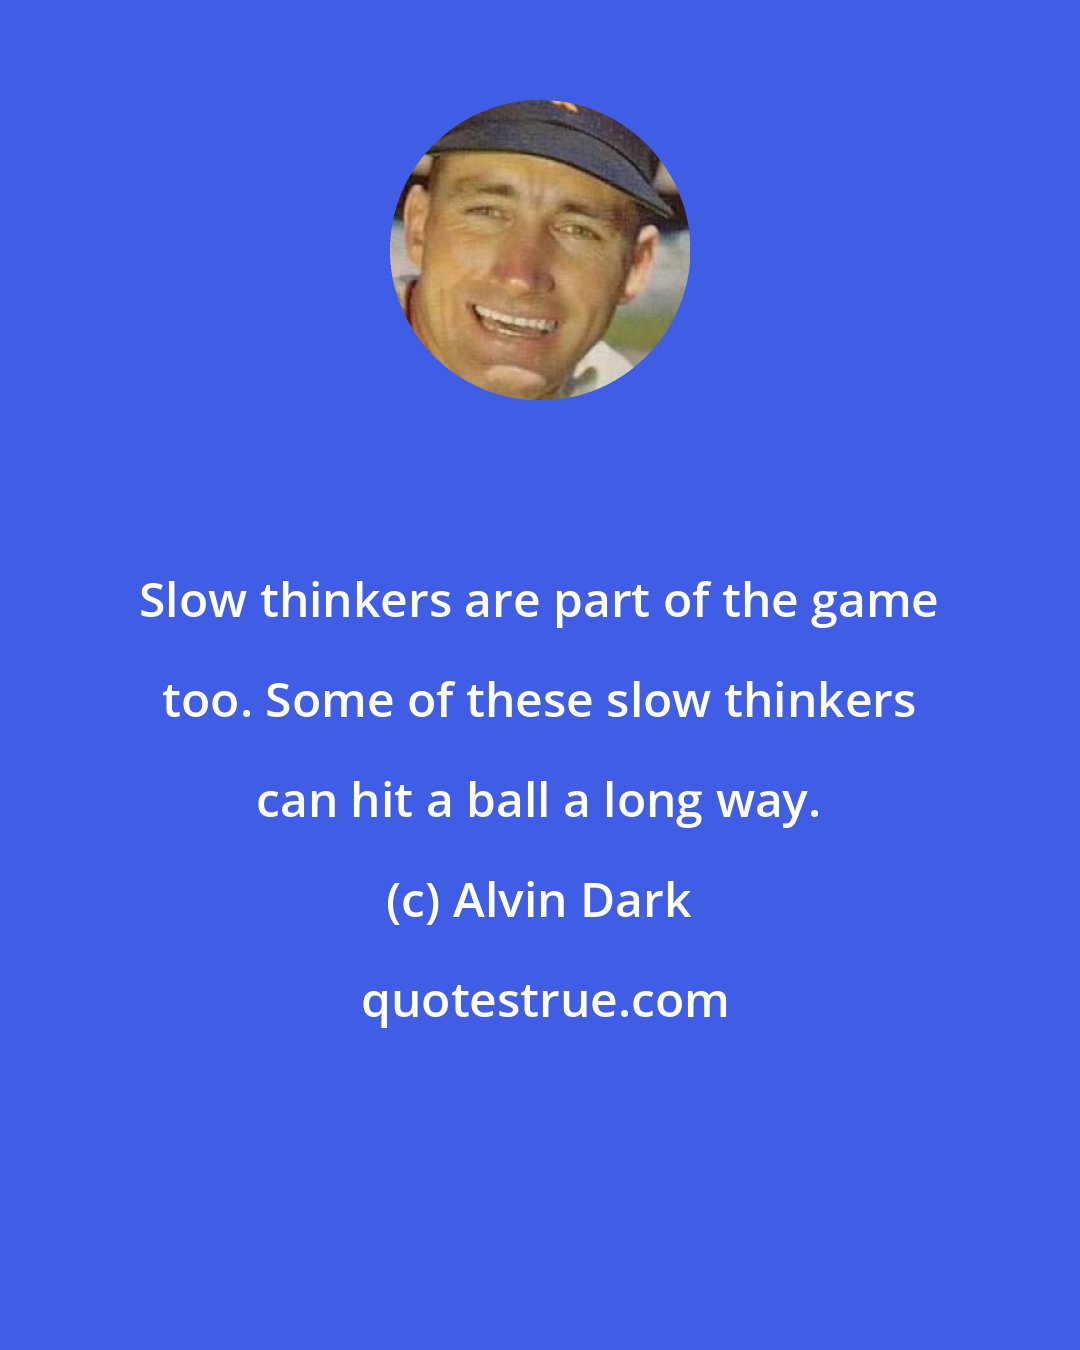 Alvin Dark: Slow thinkers are part of the game too. Some of these slow thinkers can hit a ball a long way.